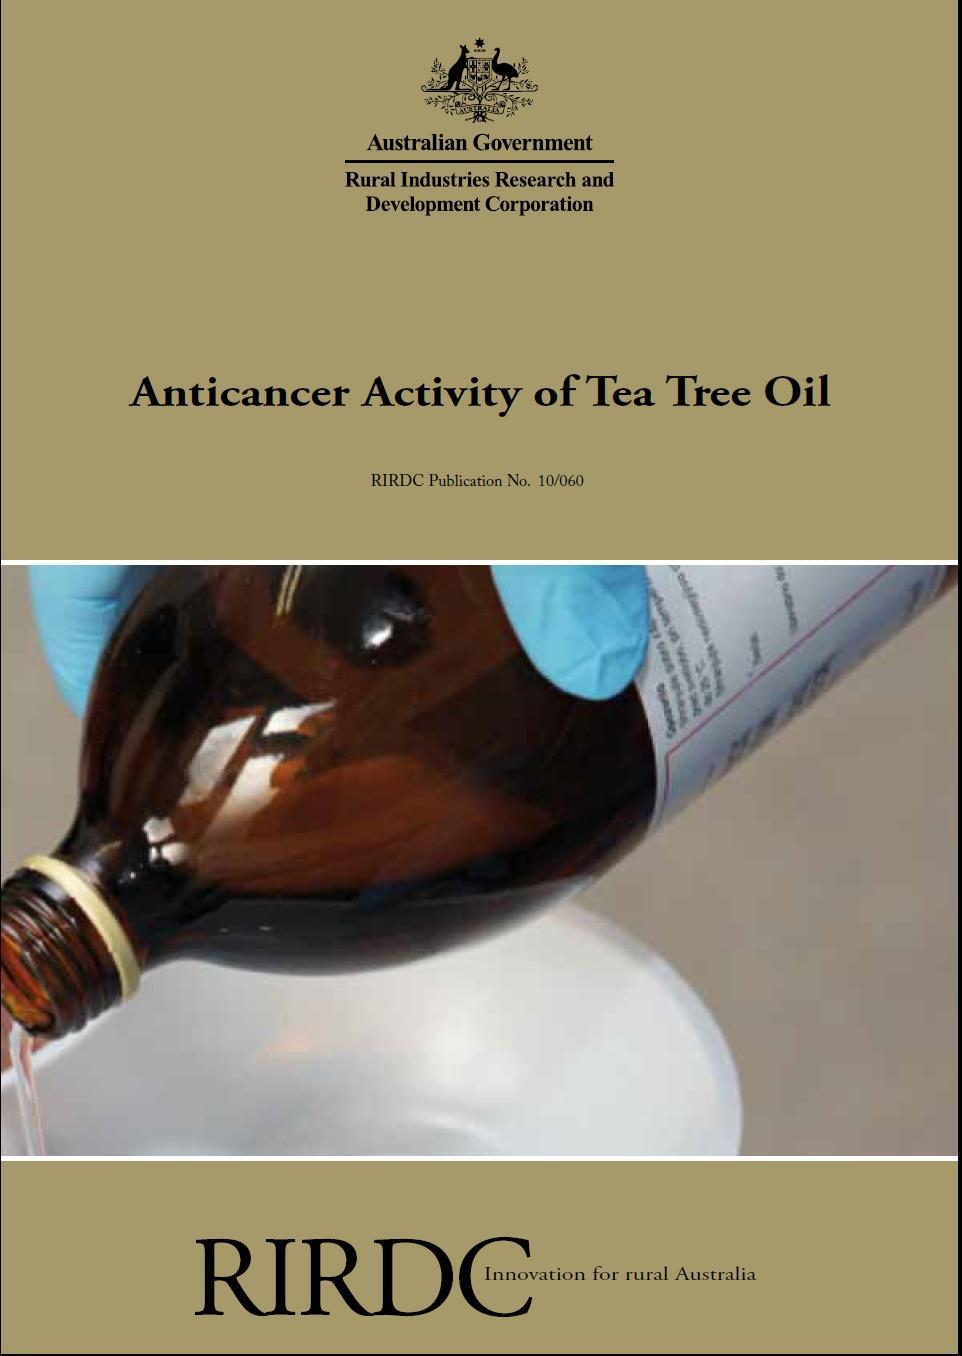 The Science So Far In 2010 Professor Manfred Beilharz and his team at The University of Western Australia conducted a preclinical trial and established that Tea Tree Oil (TTO) can significantly